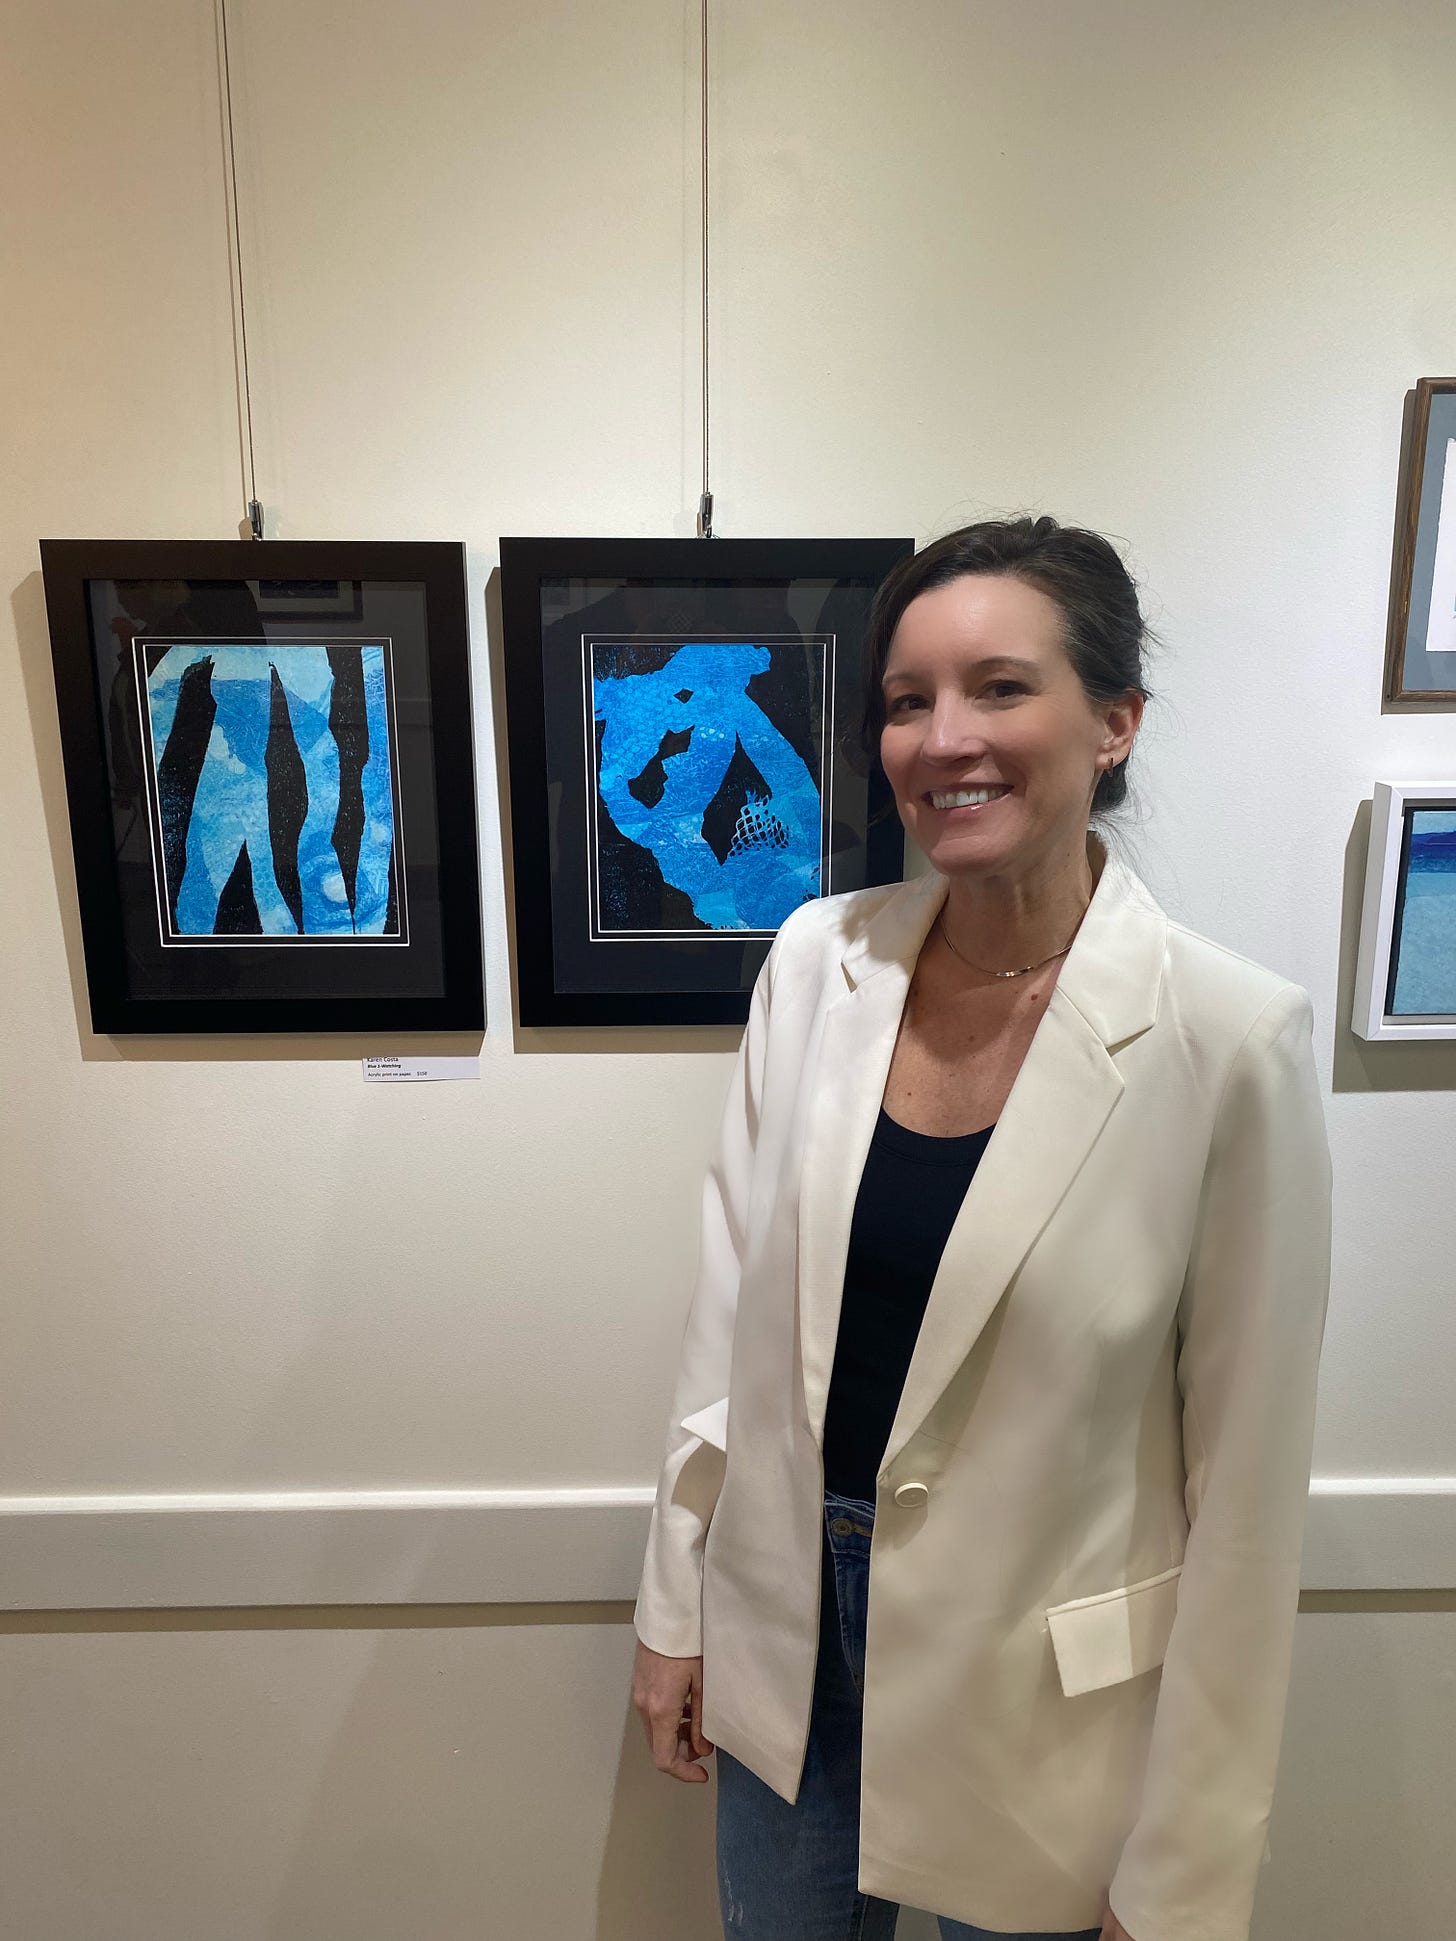 Two blue and black prints hang on an art gallery wall. Karen Costa, smiling, stands next to them wearing a white blazer.